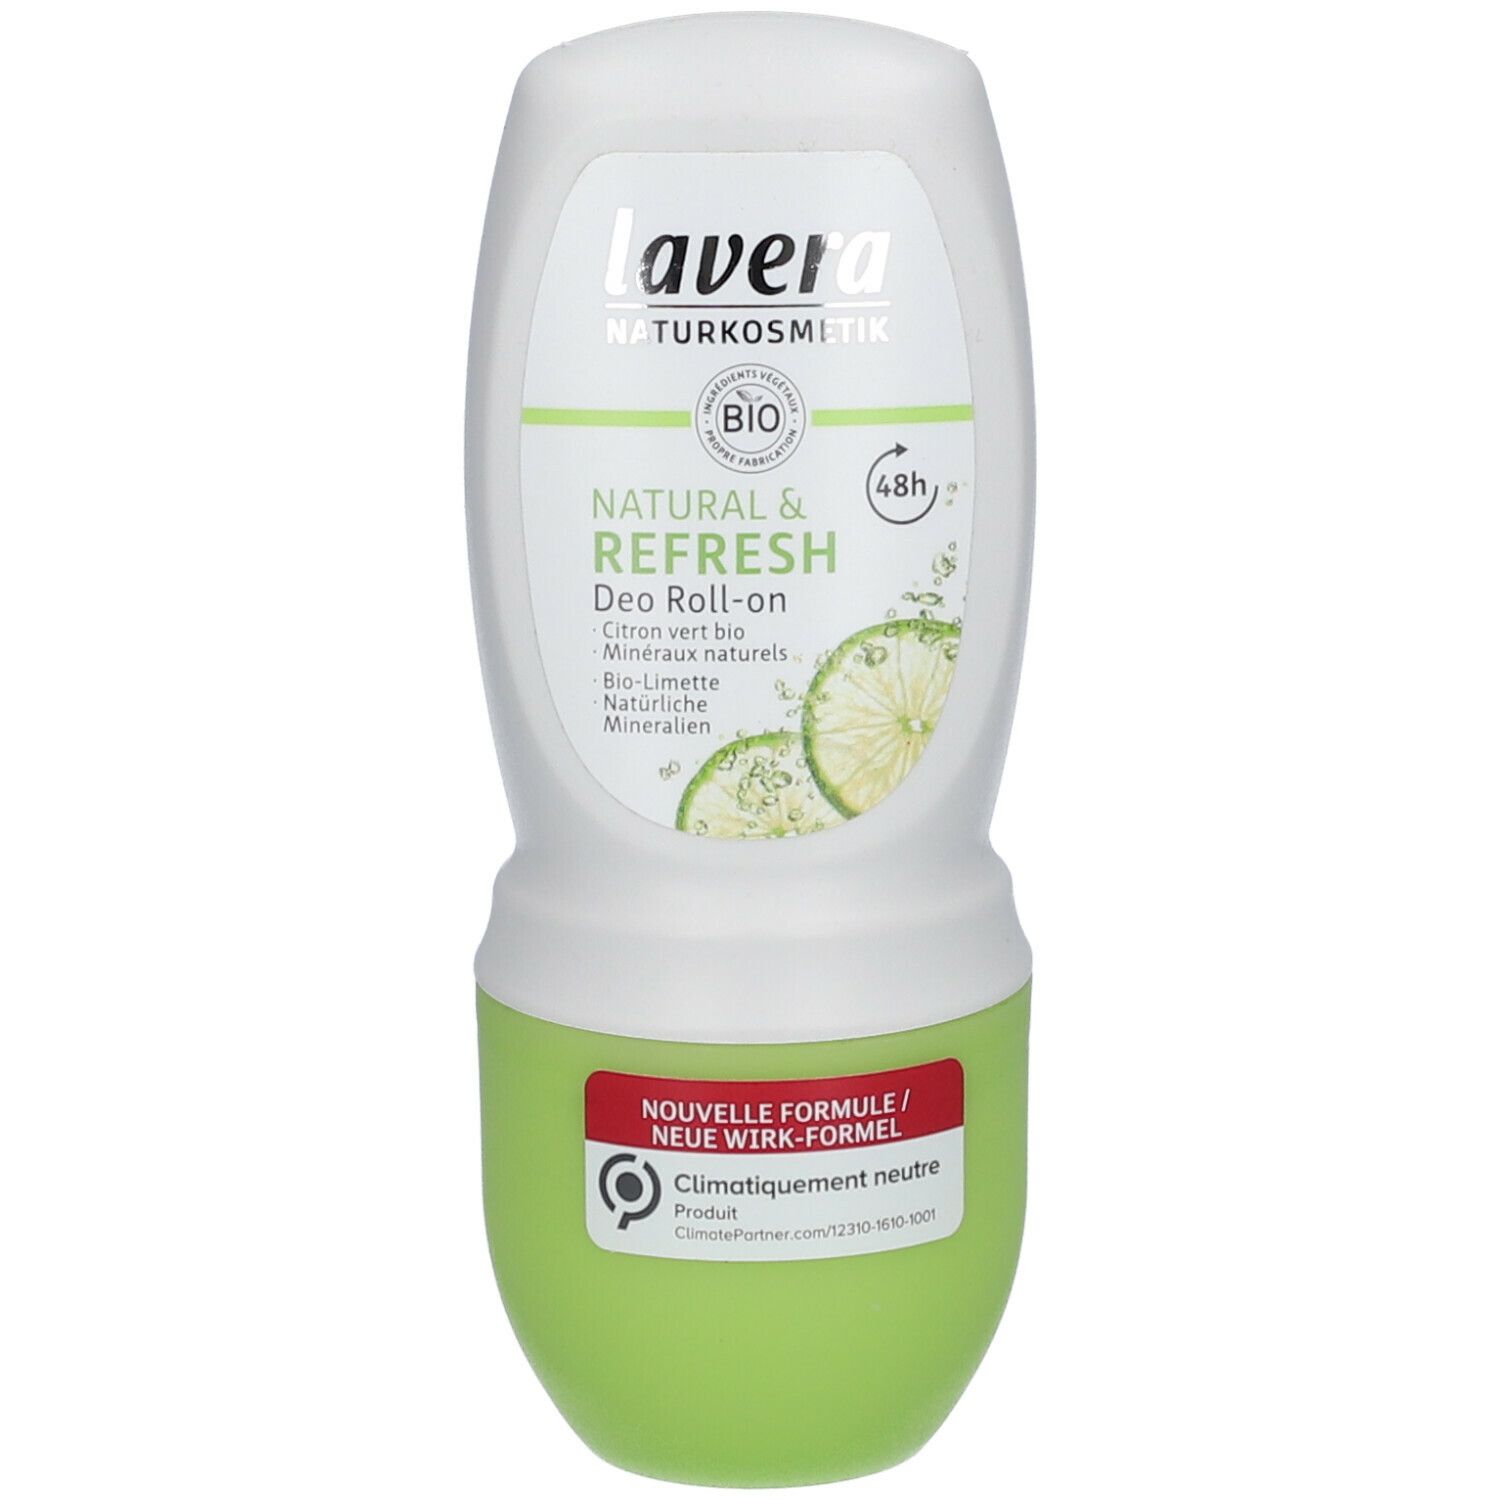 Image of lavera Deo Roll-on NATURAL & REFRESH